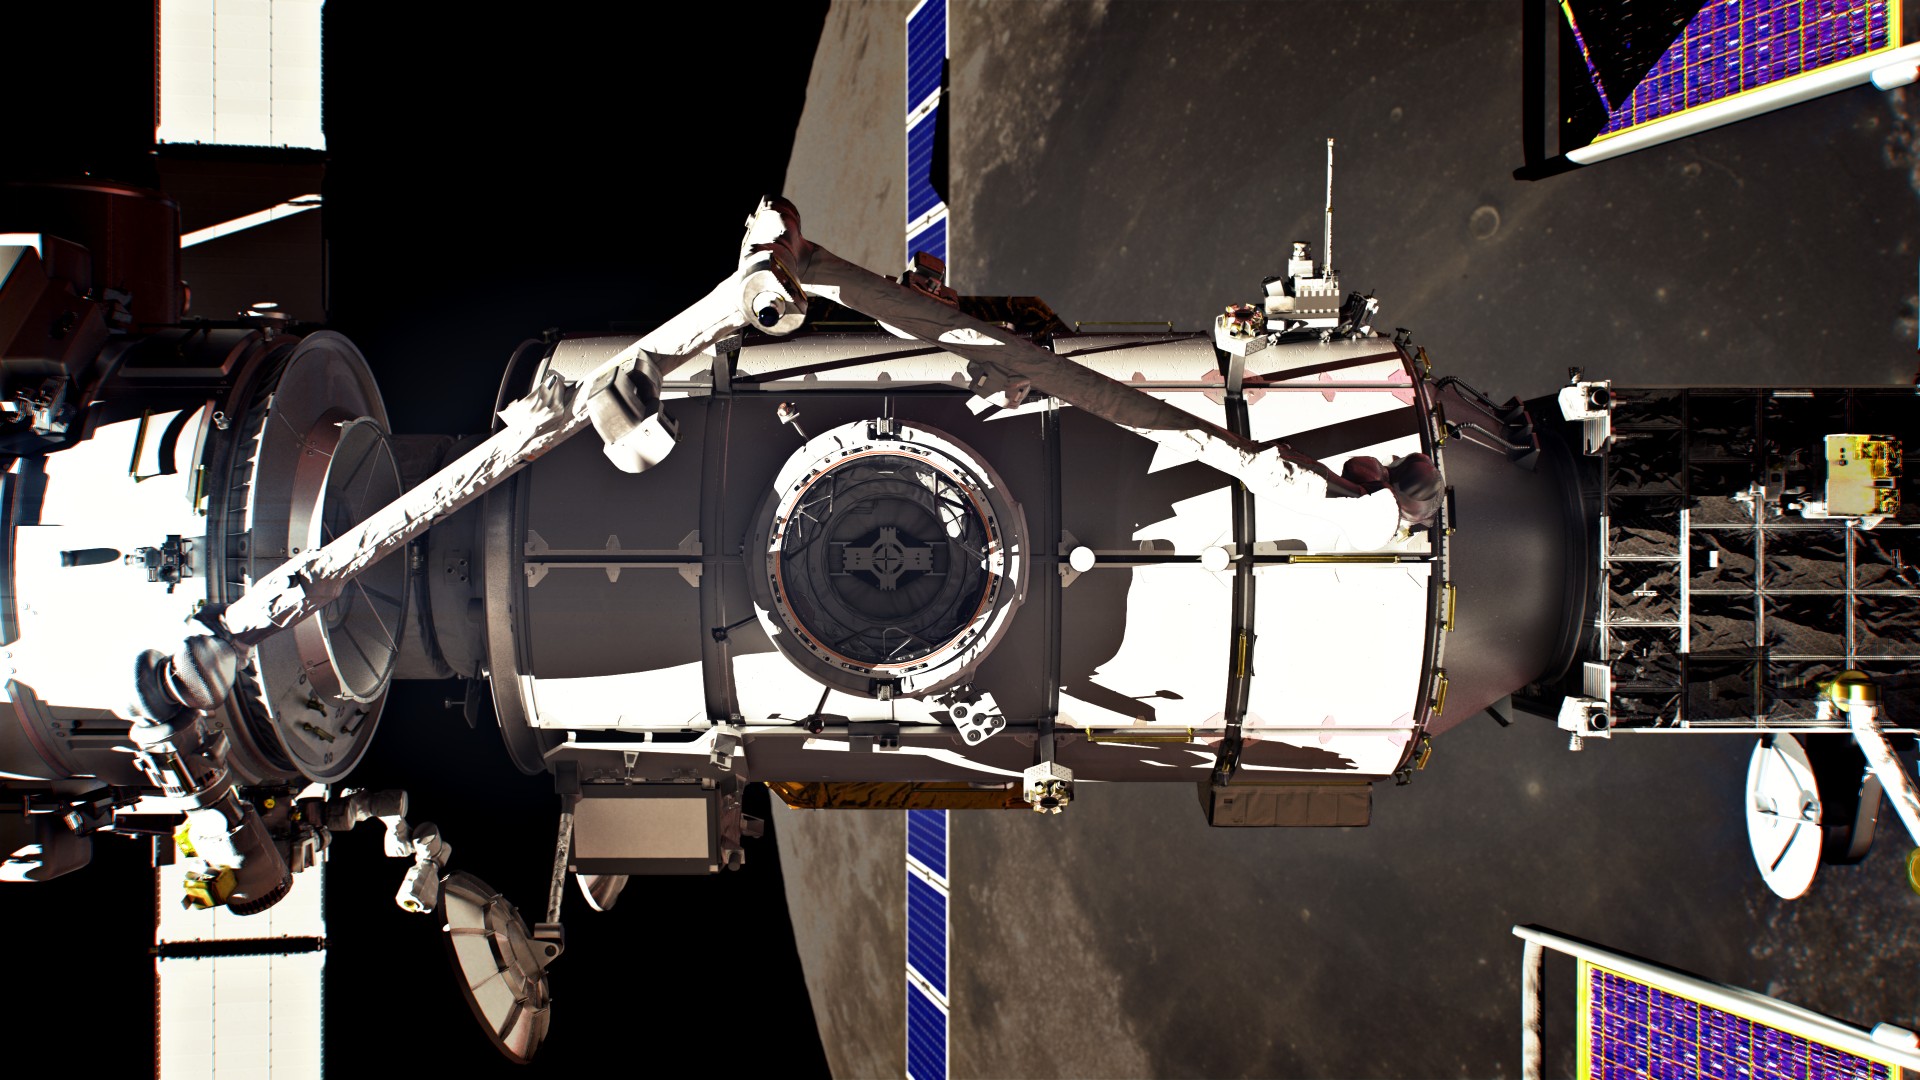 A spacecraft module with a mechanical arm attached is docked in space, with solar panels visible against a backdrop of the lunar surface.